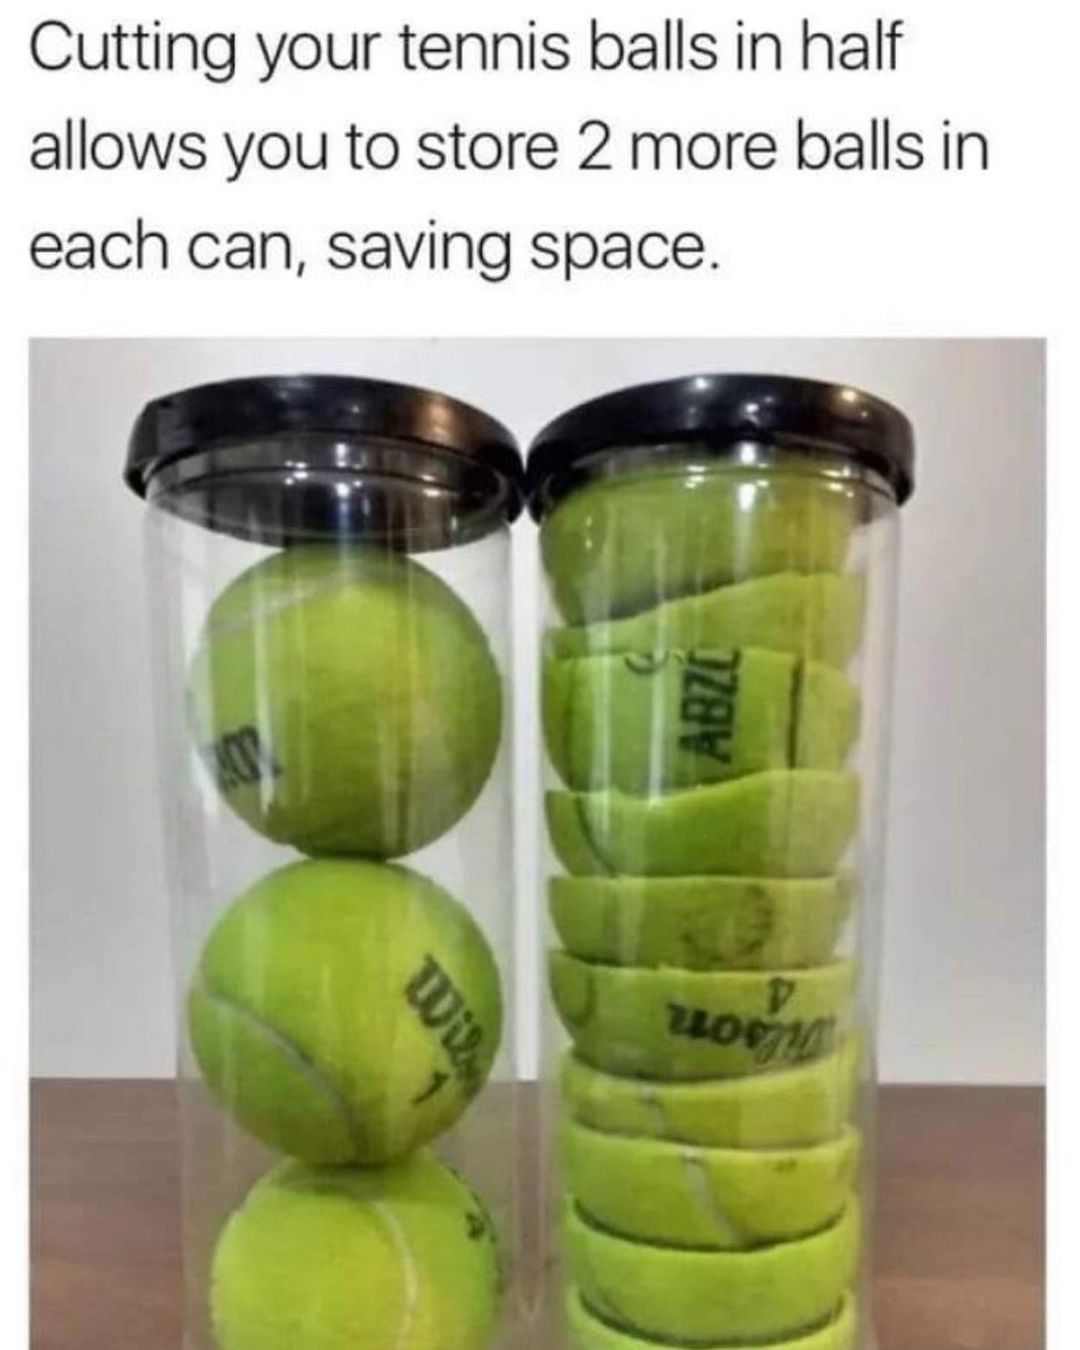 Cutting your tennis balls in half allows you to store 2 more balls in each can, saving space.